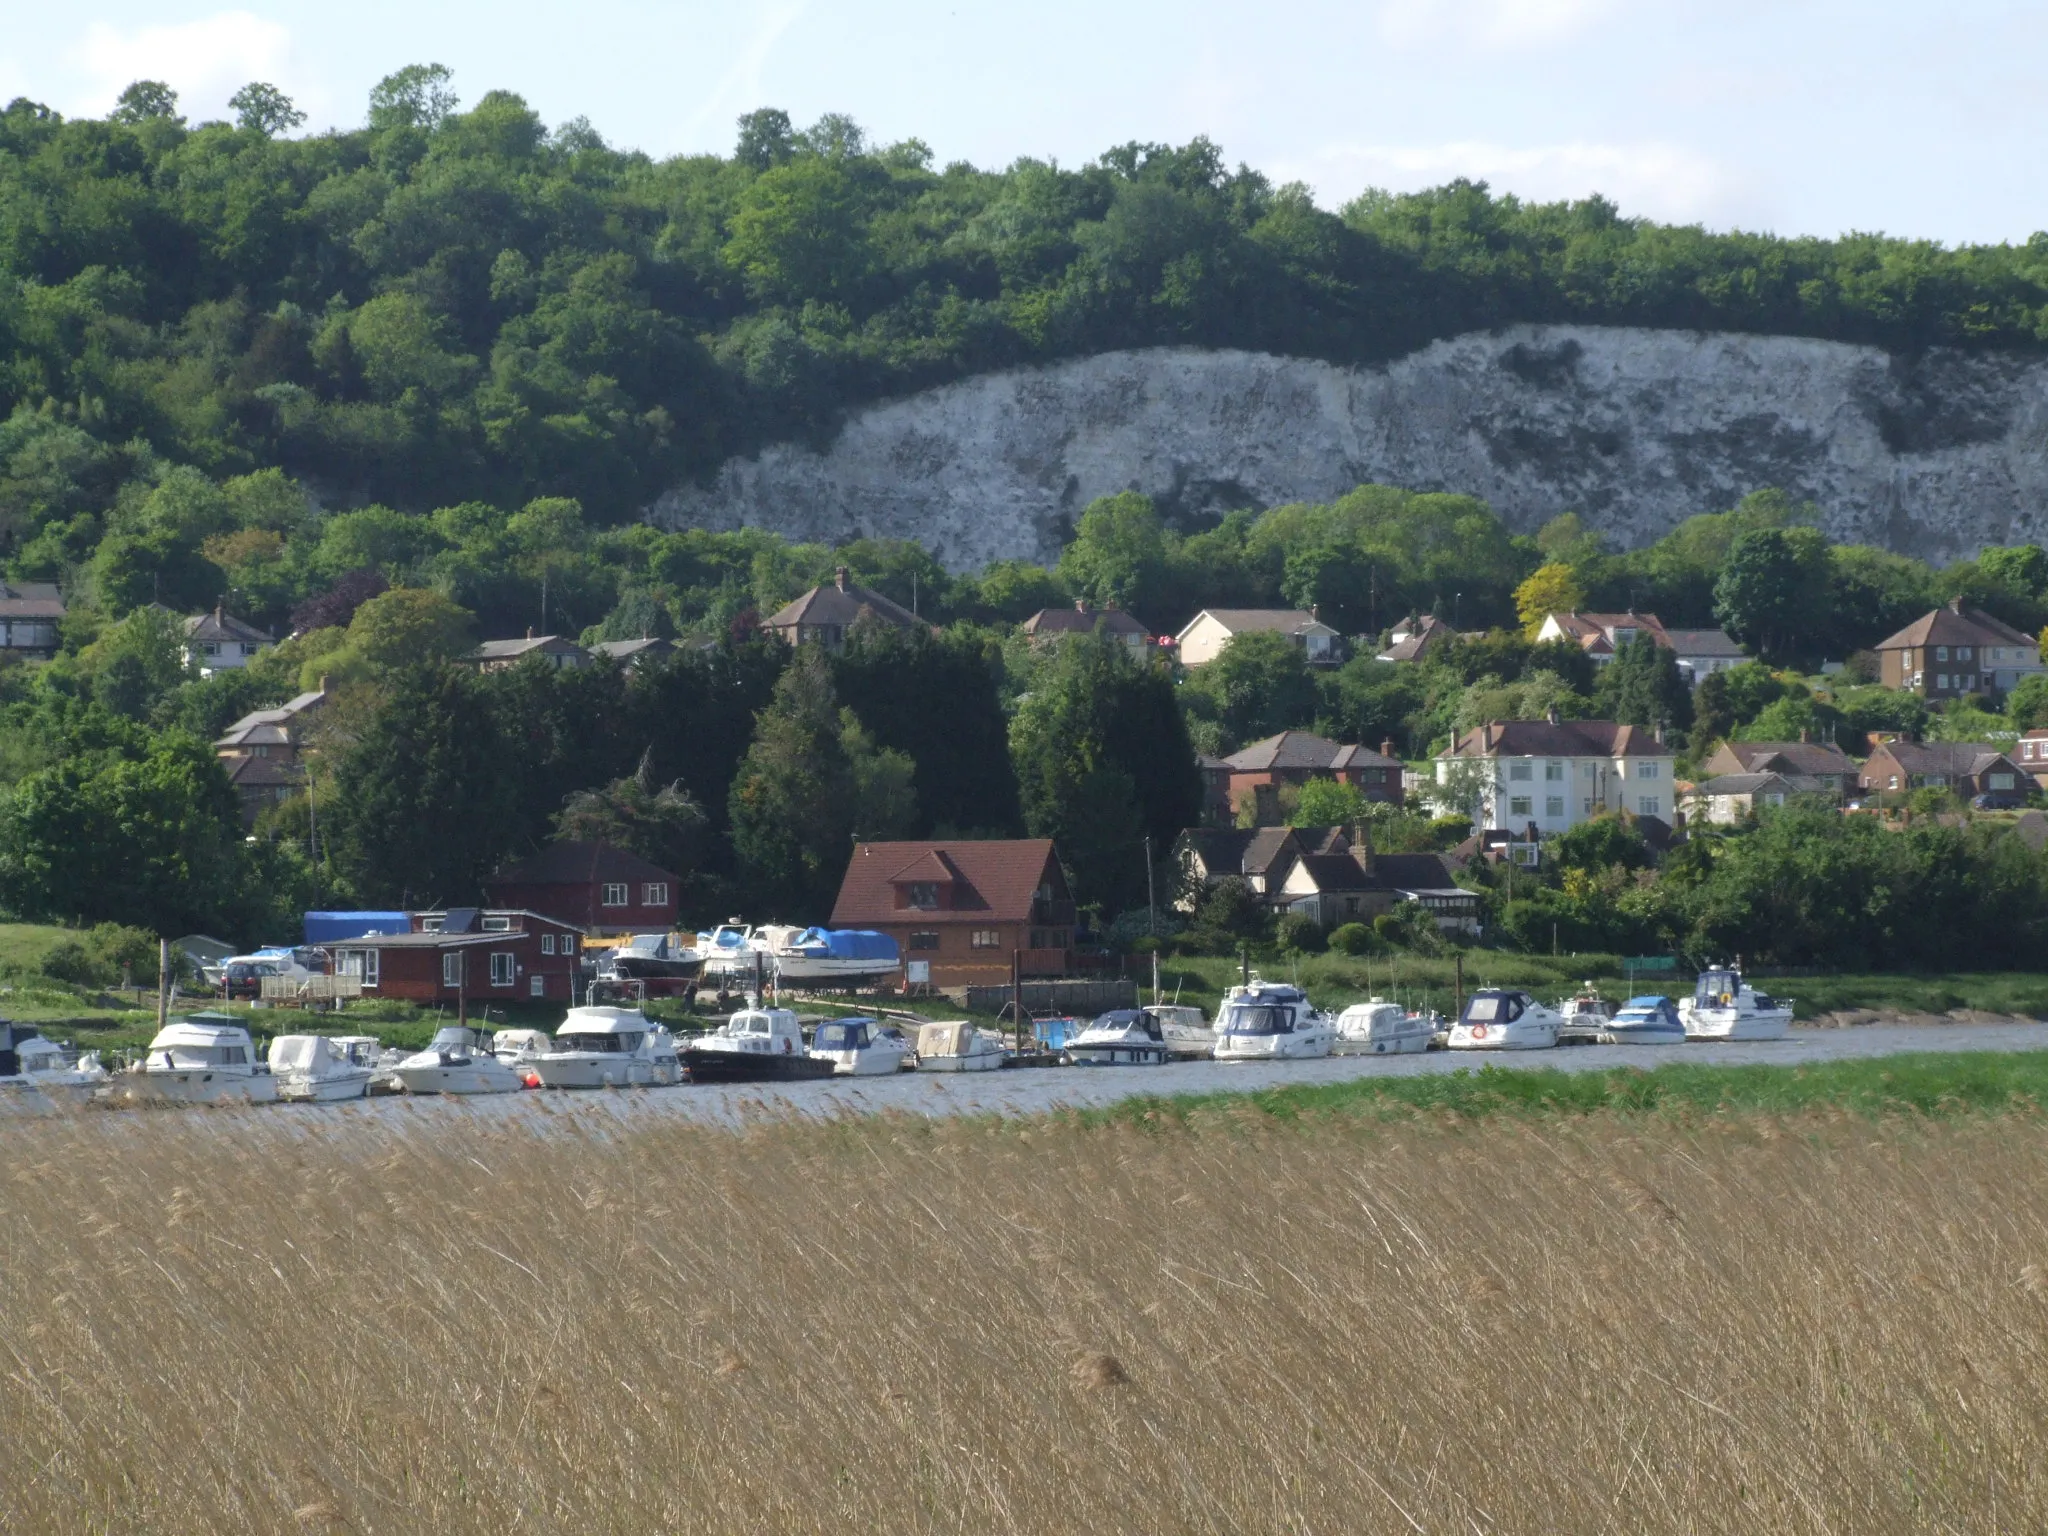 Photo showing: Halling, Kent on the River Medway.
From Wouldham Marshes, over the Medway to houses in North Halling, with cliffs of Bore's Hole and May Wood to the top left.

Camera location 51° 21′ 39.24″ N, 0° 27′ 04.68″ E View this and other nearby images on: OpenStreetMap 51.360900;    0.451300